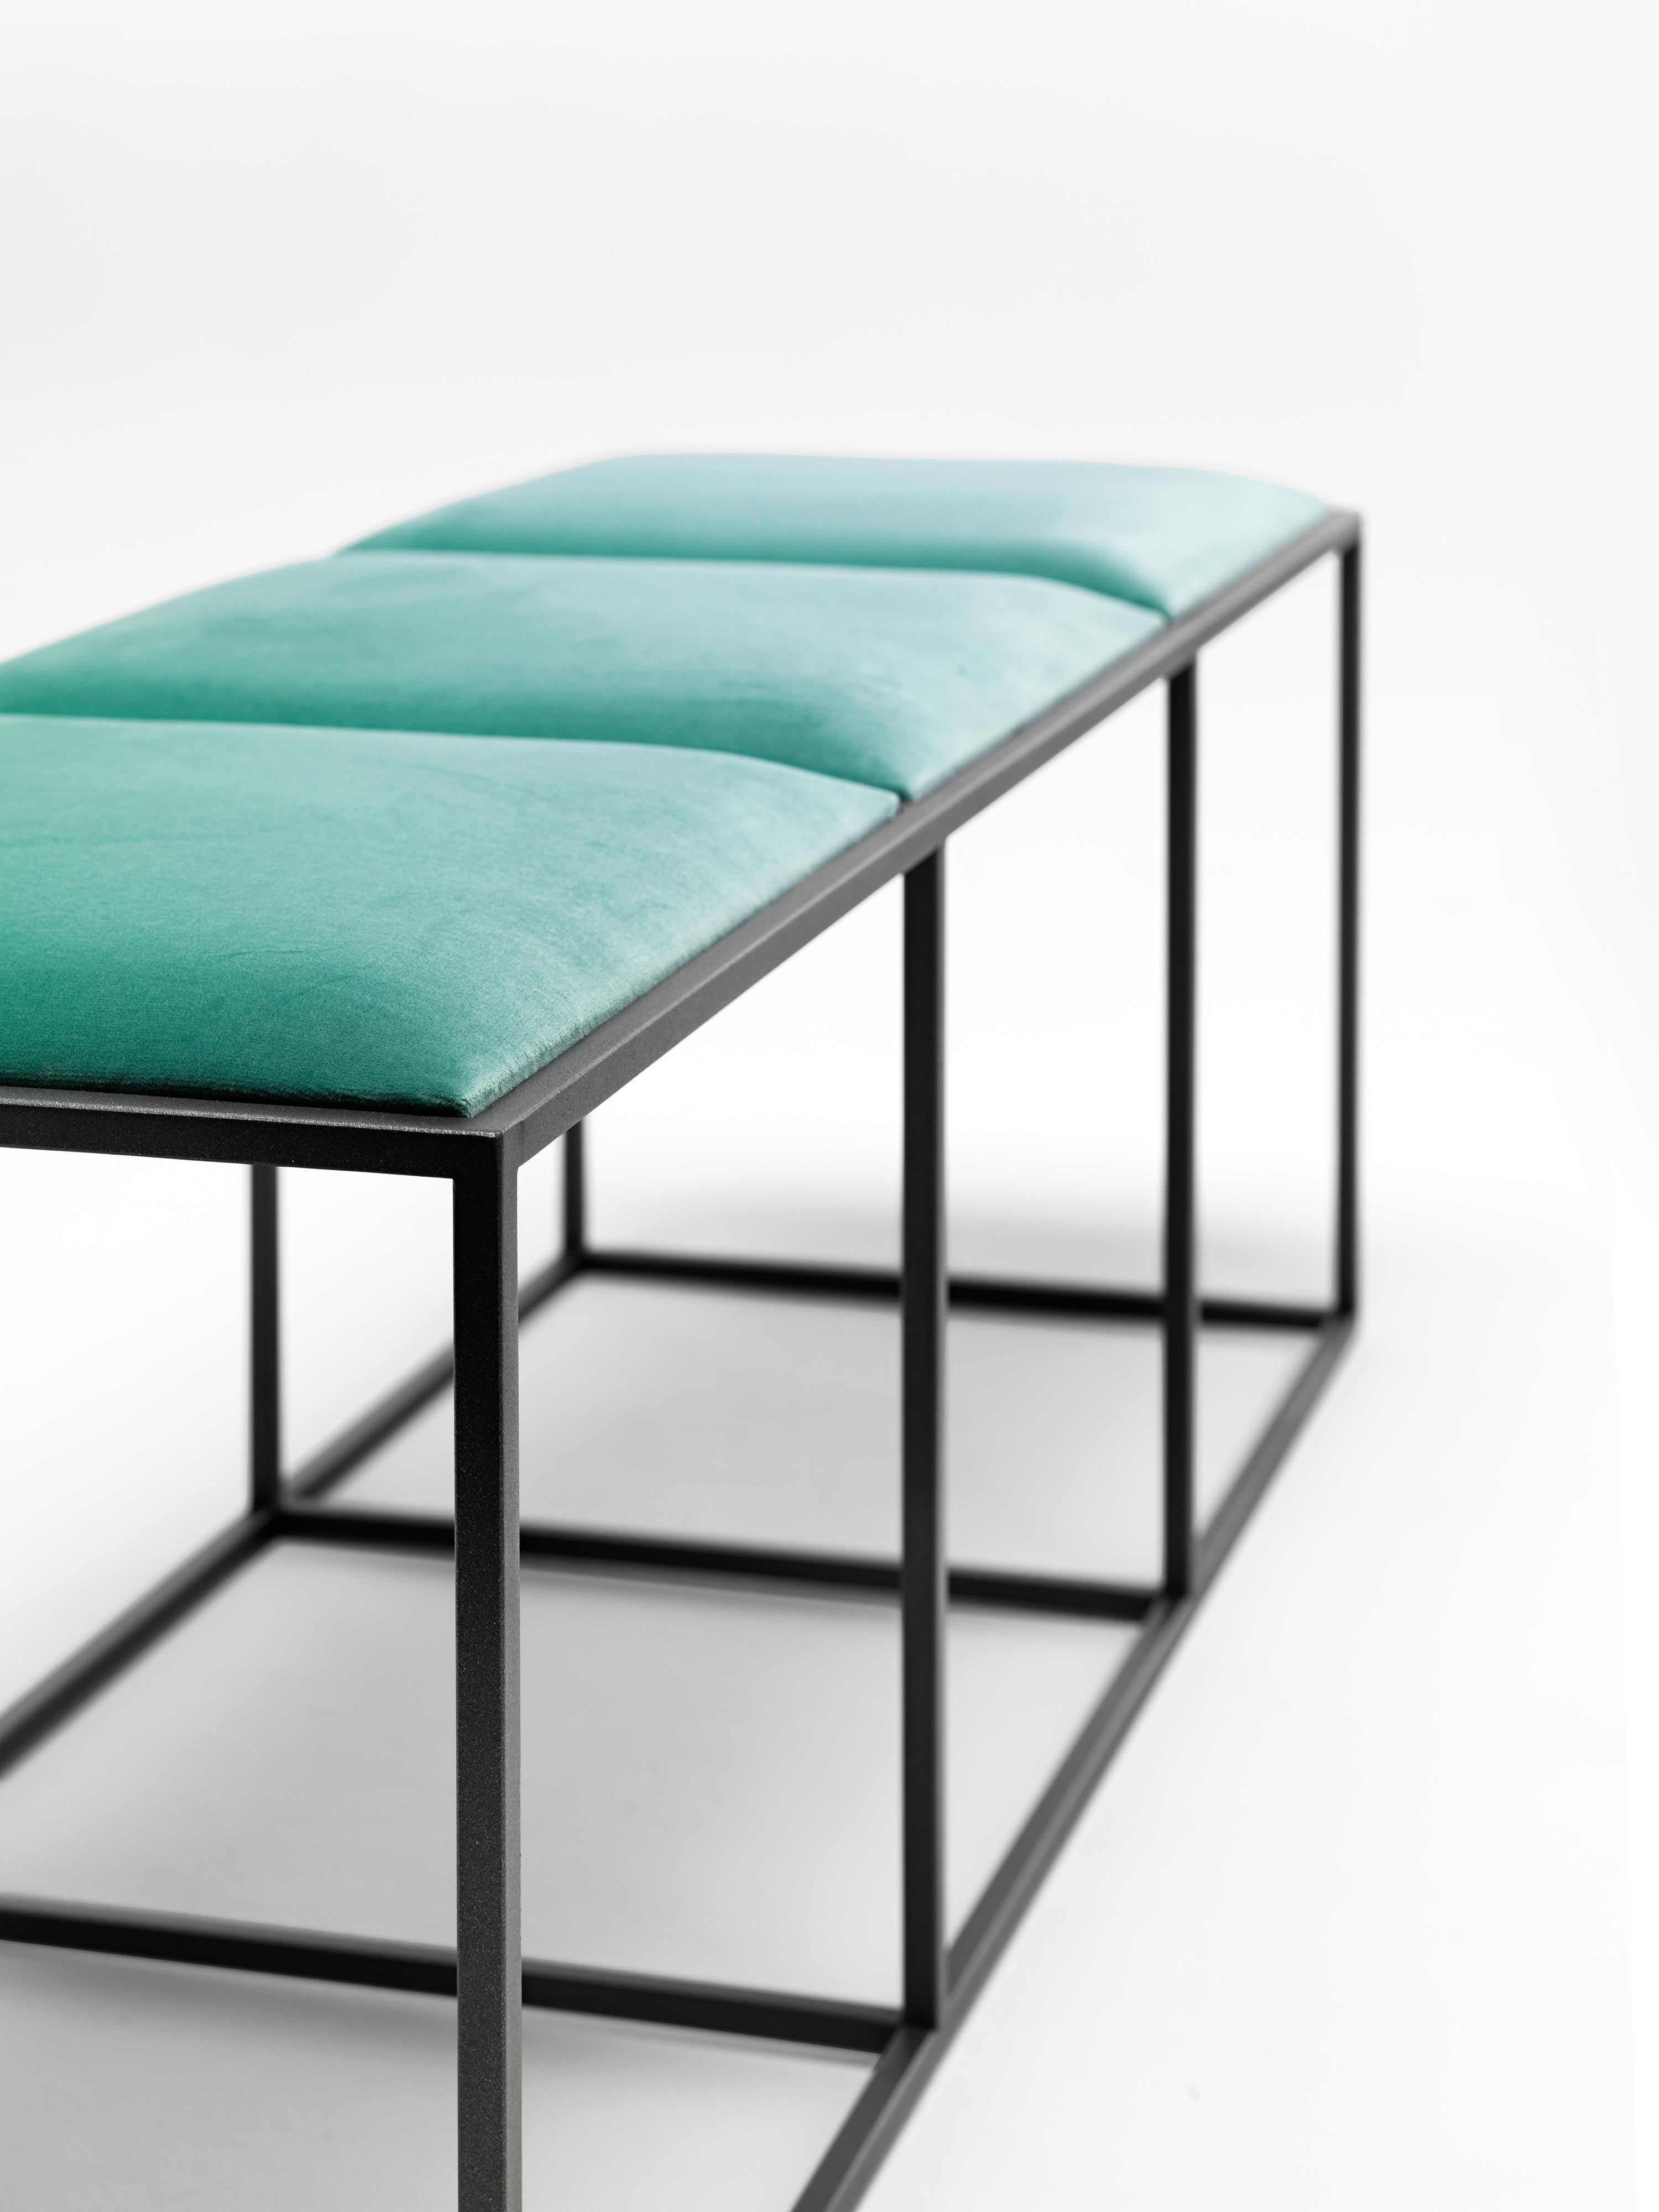 Italian 21st Century Modern Painted Steel Bench With Seats In Cotton Velvet For Sale